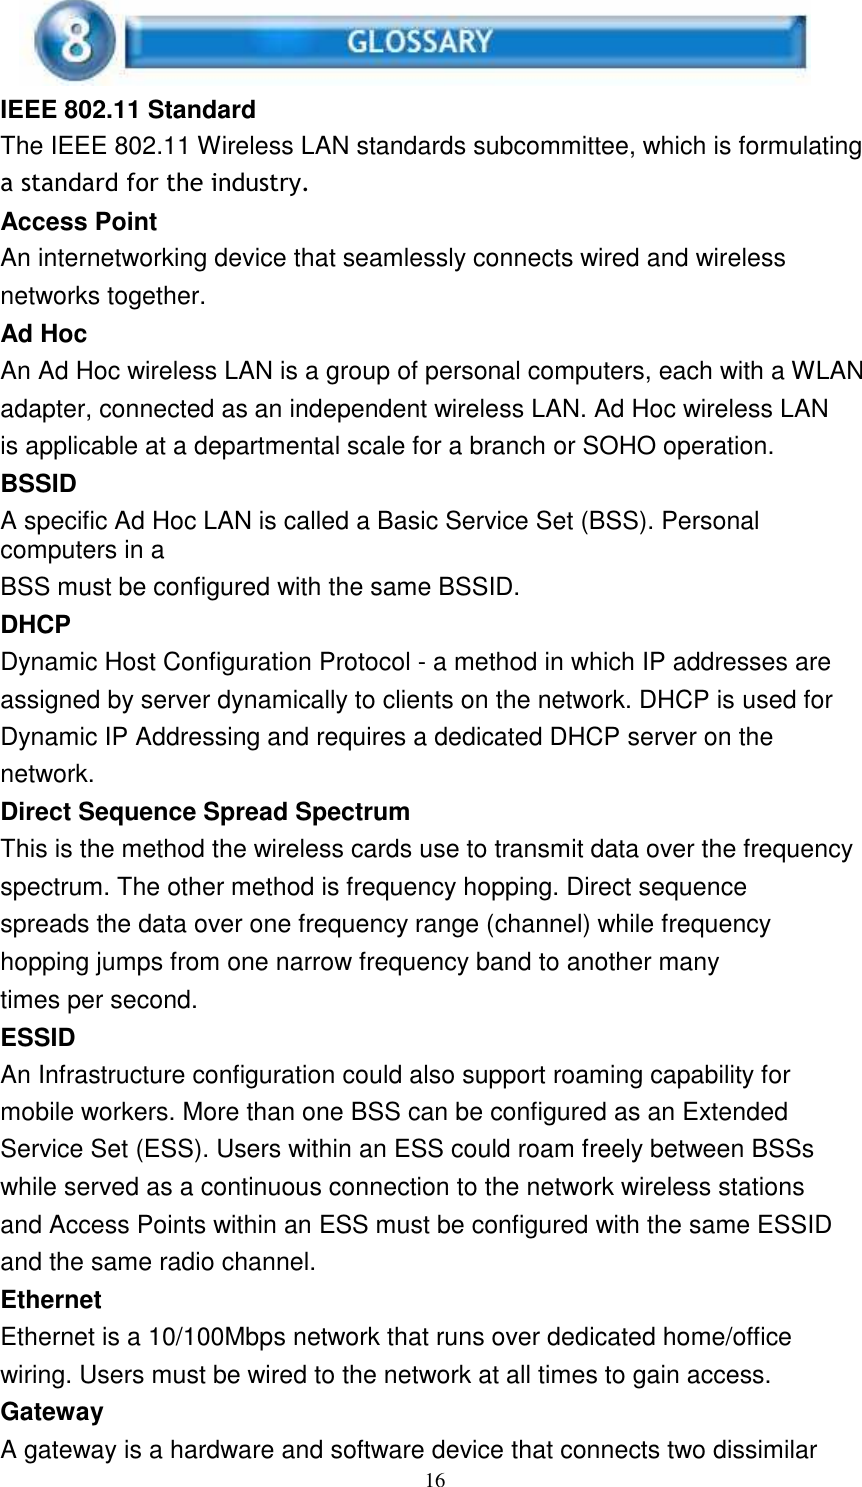 16      IEEE 802.11 Standard The IEEE 802.11 Wireless LAN standards subcommittee, which is formulating a standard for the industry. Access Point An internetworking device that seamlessly connects wired and wireless networks together. Ad Hoc An Ad Hoc wireless LAN is a group of personal computers, each with a WLAN adapter, connected as an independent wireless LAN. Ad Hoc wireless LAN is applicable at a departmental scale for a branch or SOHO operation. BSSID A specific Ad Hoc LAN is called a Basic Service Set (BSS). Personal computers in a BSS must be configured with the same BSSID. DHCP Dynamic Host Configuration Protocol - a method in which IP addresses are assigned by server dynamically to clients on the network. DHCP is used for Dynamic IP Addressing and requires a dedicated DHCP server on the network. Direct Sequence Spread Spectrum This is the method the wireless cards use to transmit data over the frequency spectrum. The other method is frequency hopping. Direct sequence spreads the data over one frequency range (channel) while frequency hopping jumps from one narrow frequency band to another many times per second. ESSID An Infrastructure configuration could also support roaming capability for mobile workers. More than one BSS can be configured as an Extended Service Set (ESS). Users within an ESS could roam freely between BSSs while served as a continuous connection to the network wireless stations and Access Points within an ESS must be configured with the same ESSID and the same radio channel. Ethernet Ethernet is a 10/100Mbps network that runs over dedicated home/office wiring. Users must be wired to the network at all times to gain access. Gateway A gateway is a hardware and software device that connects two dissimilar 